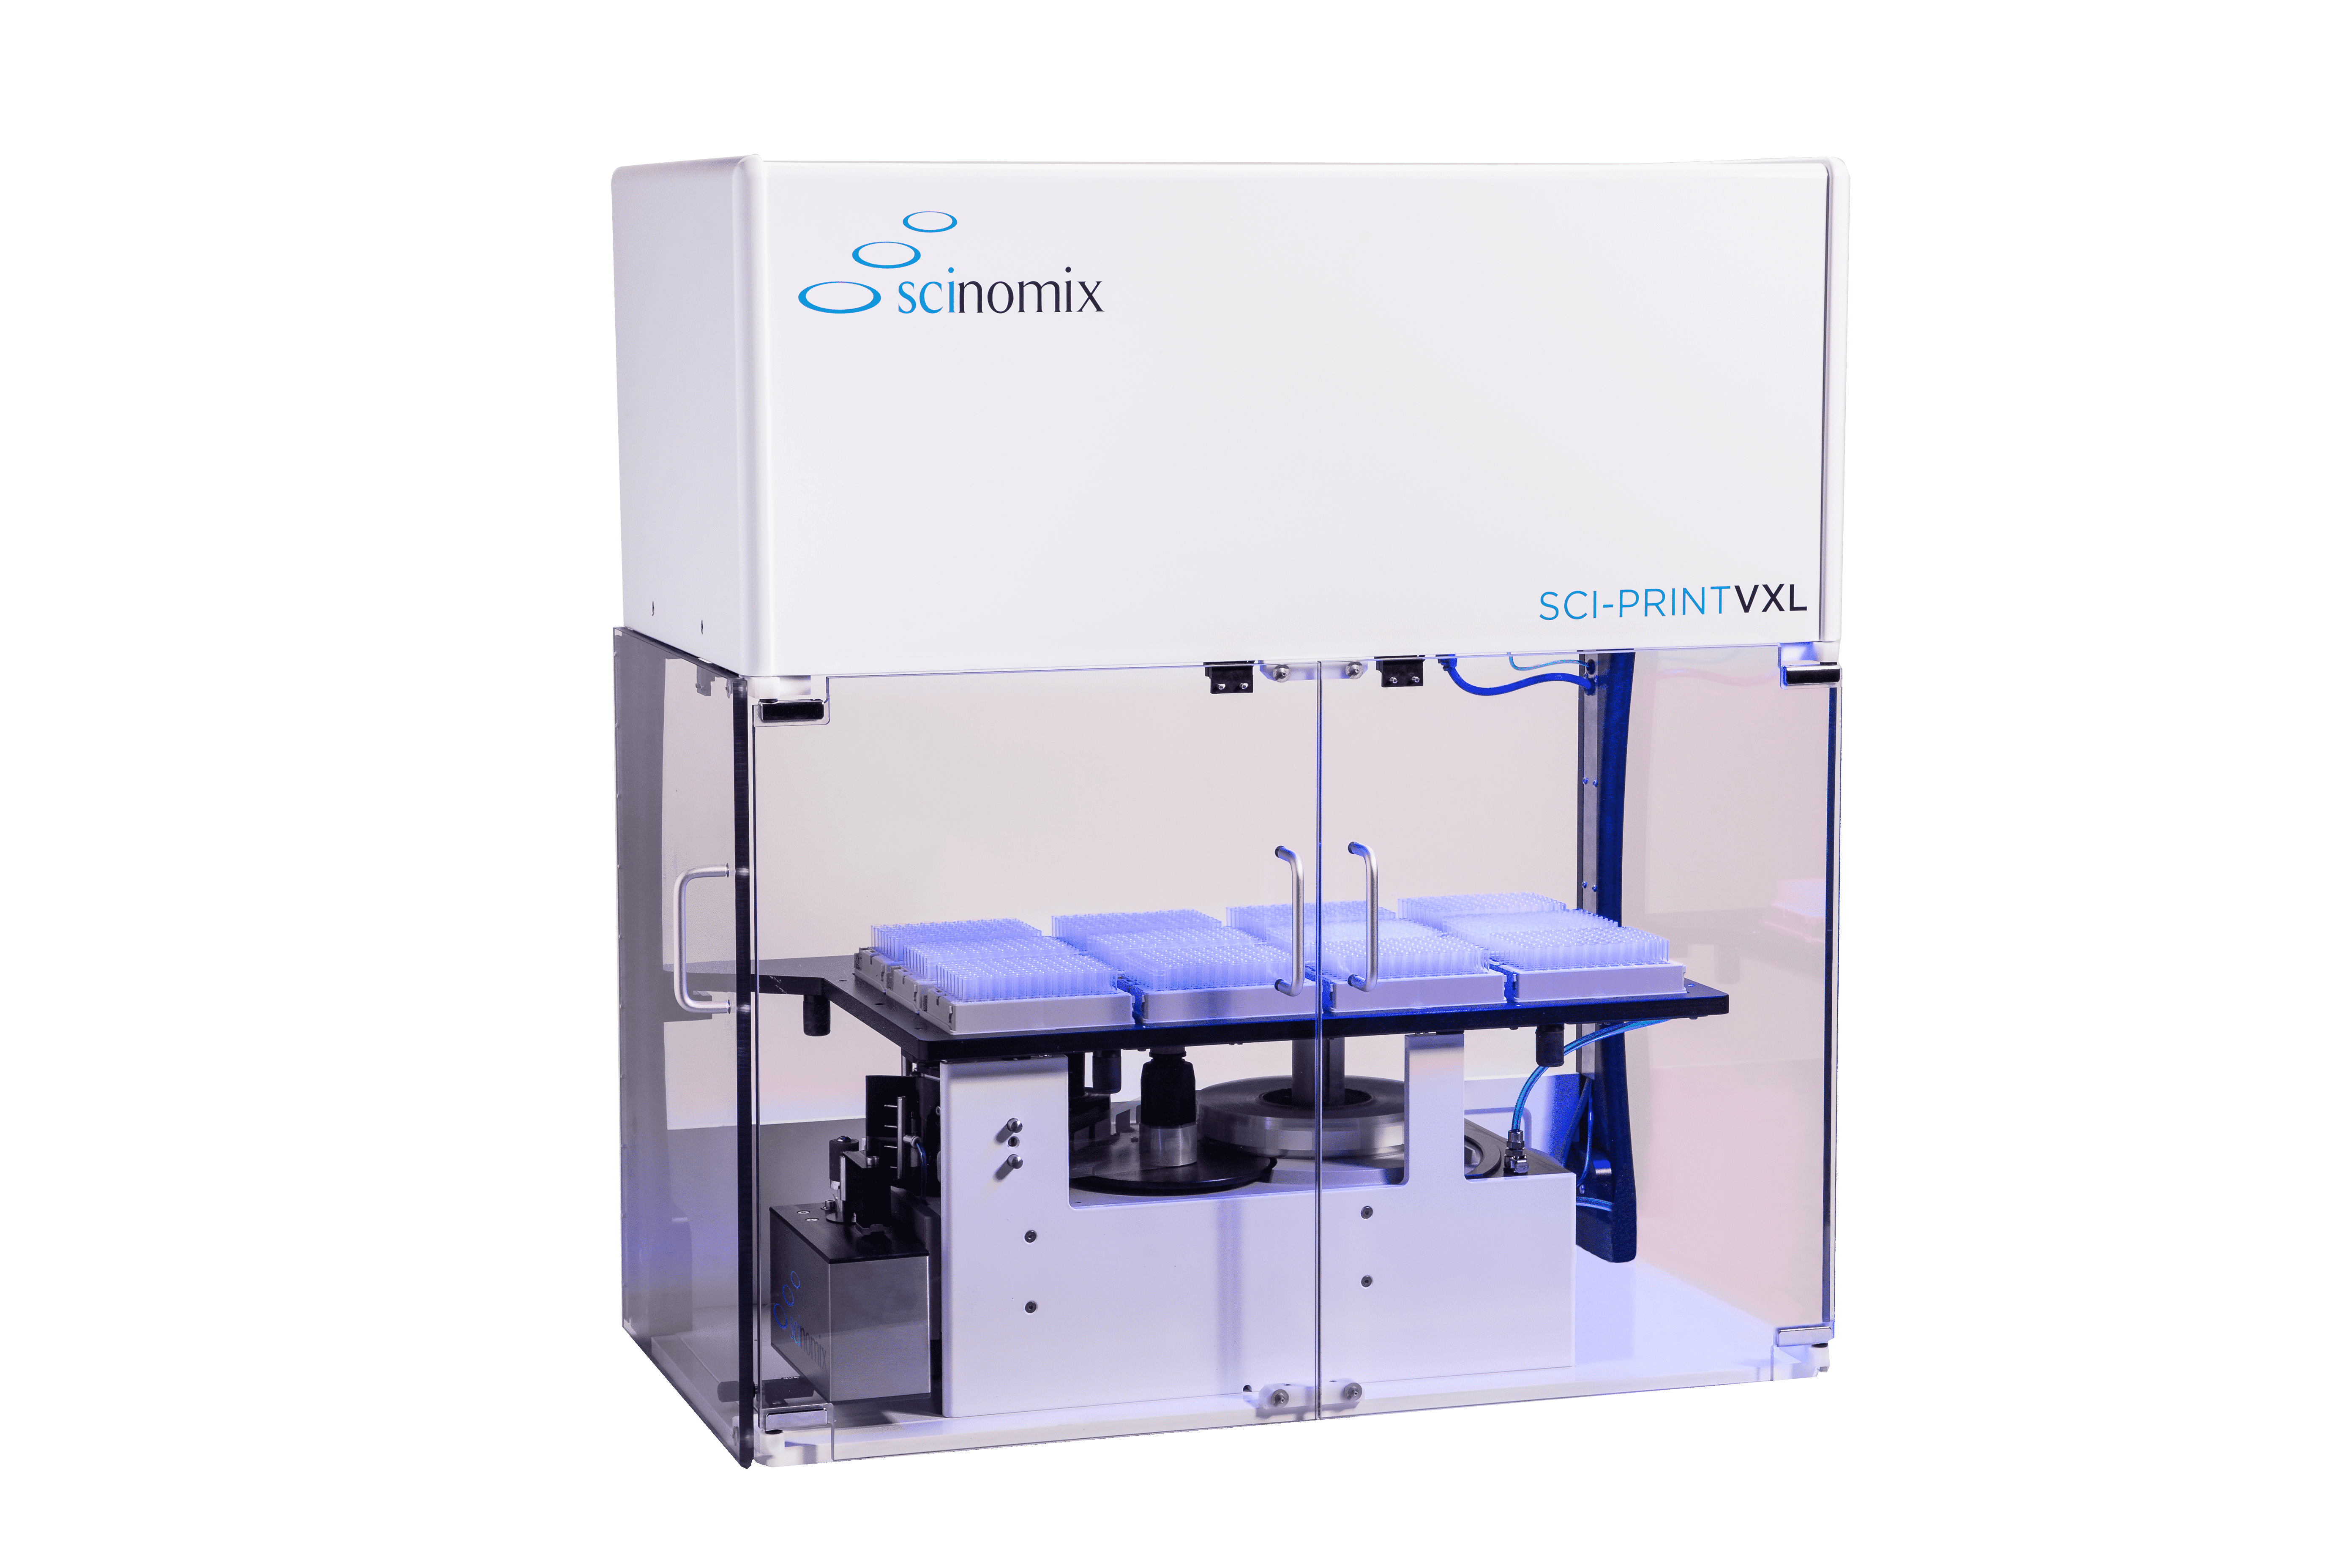 The Sci-Print VXL fully-automated tube labeler by Scinomix